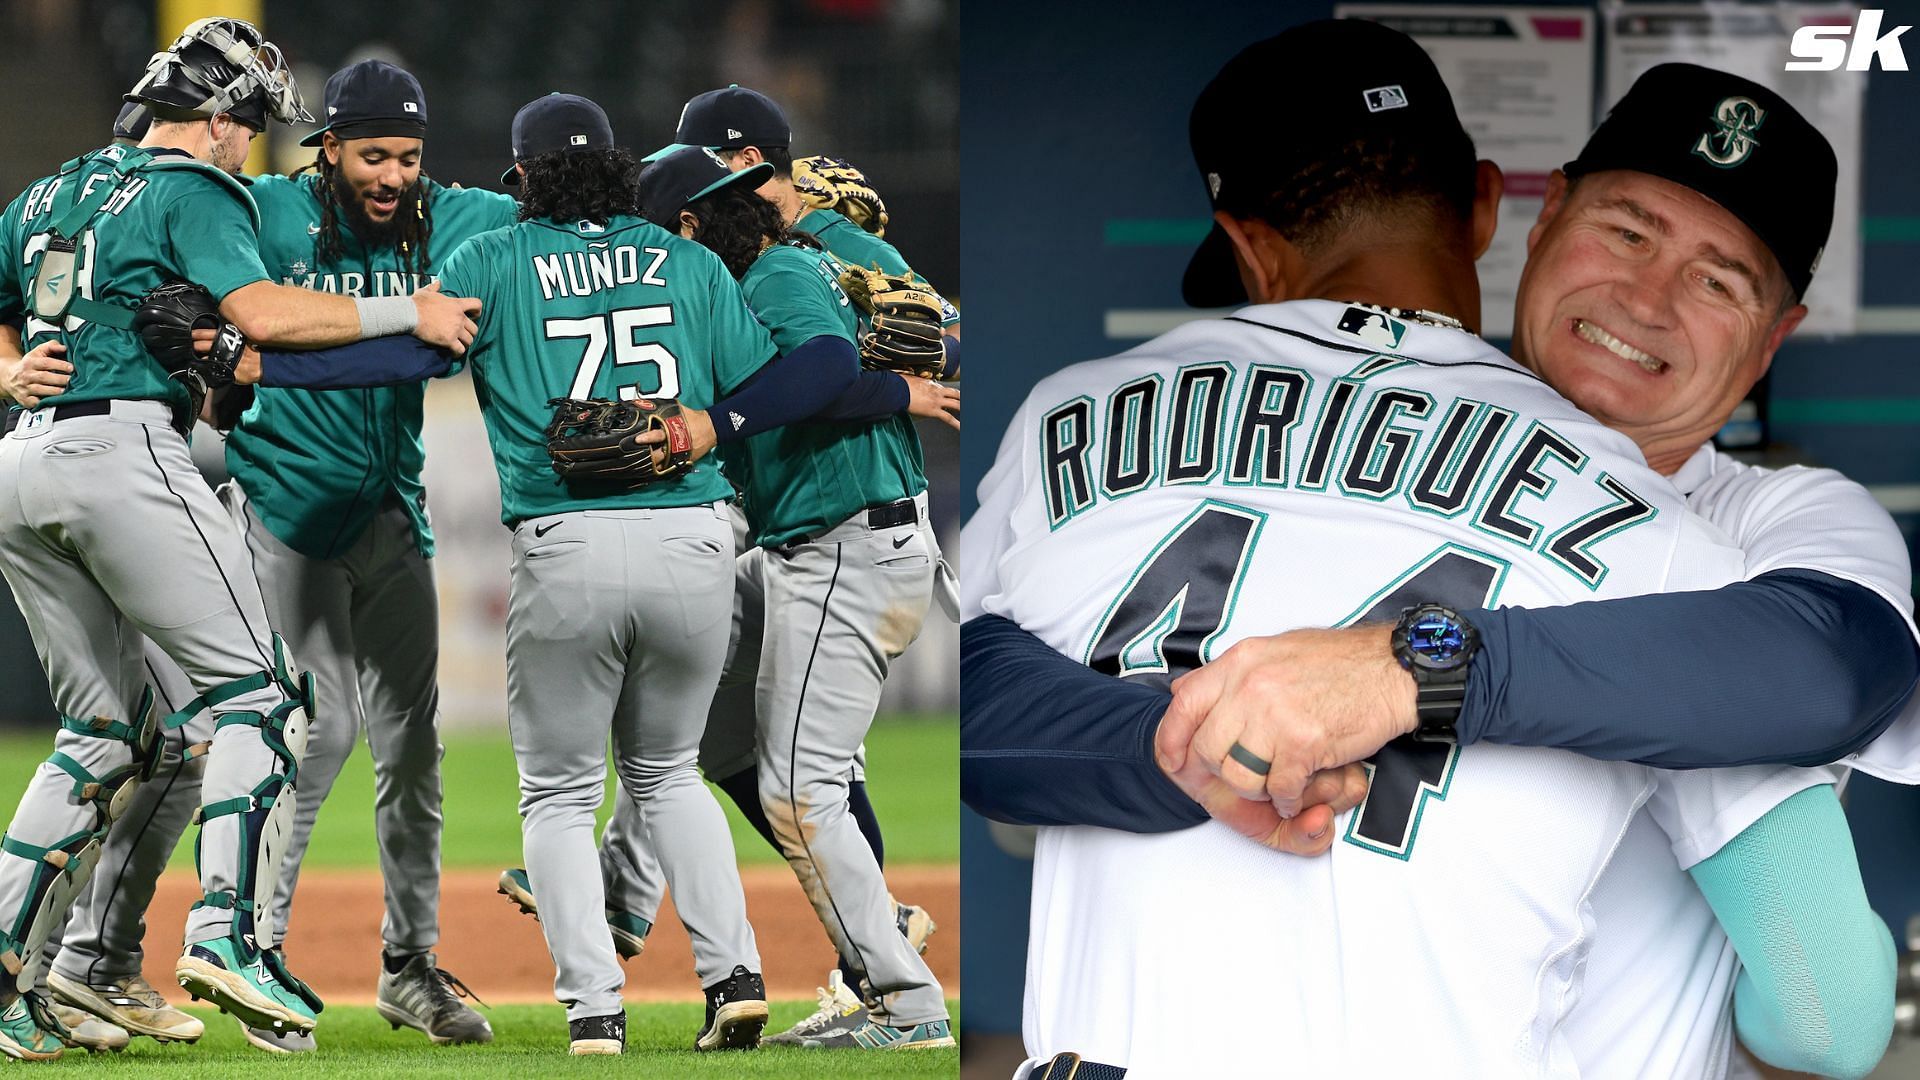 Salk: What separates playoff-bound Mariners from M's teams that